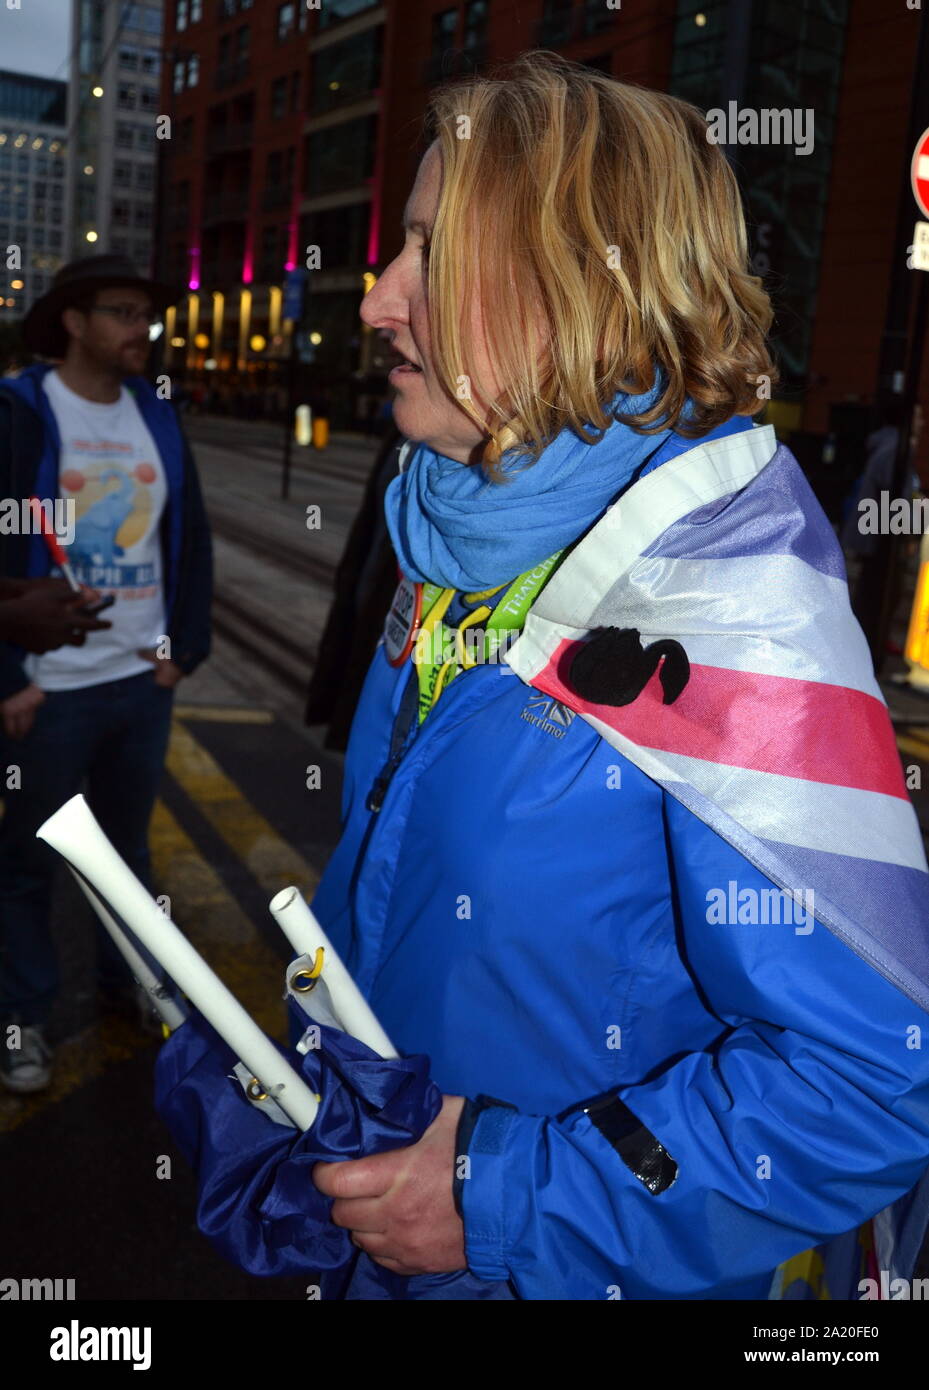 An altercation took place near the main gate of the Conservative Party Conference, 2019, in Manchester, uk.  A member of the Stand of Defiance European Movement, wearing a union jack flag, talks to police after EU flags belonging to the group were allegedly stolen and damaged. Femi Oluwole of the anti-Brexit Our Future Our Choice group helped the owner of the flags and posted video of the incident on his twitter feed. The media reports that one of the men who took the flags is a Conservative Councillor. Stock Photo